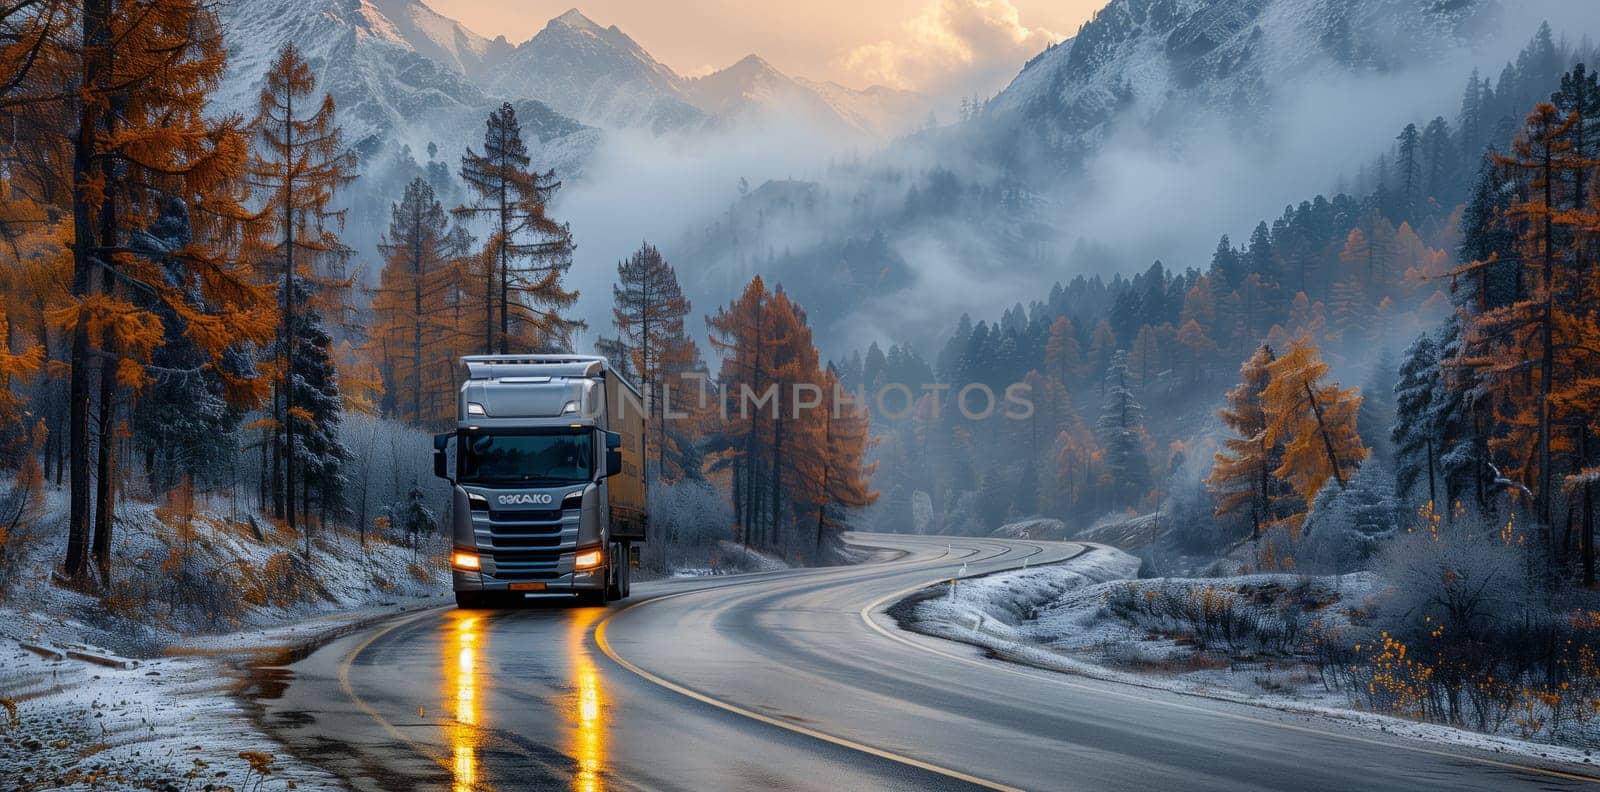 Vehicle navigating icy mountain road with snowcovered asphalt by richwolf